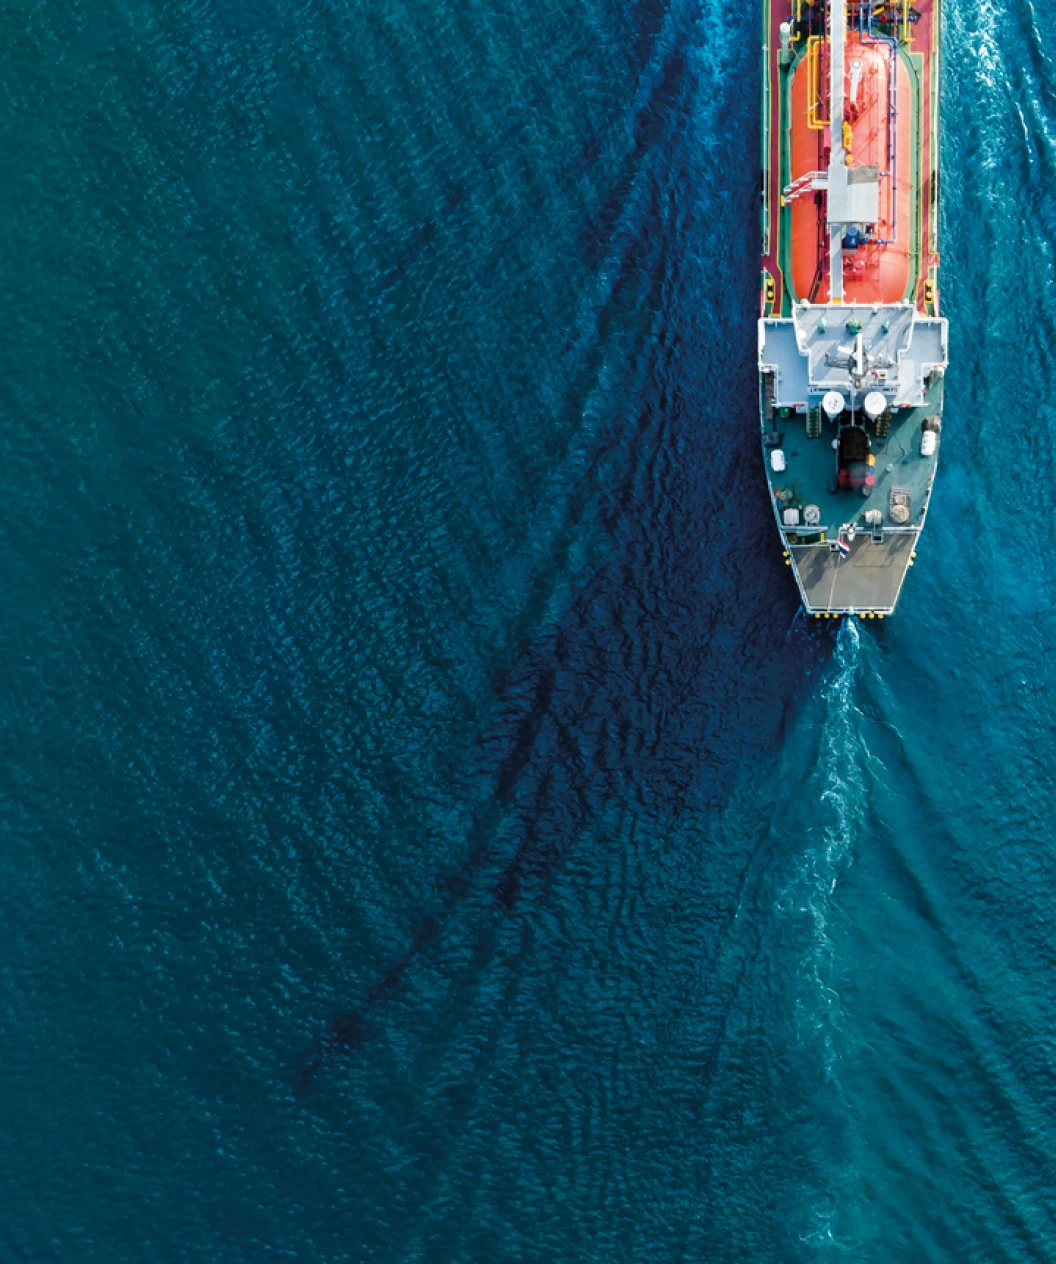 Arial view of a ship in the ocean